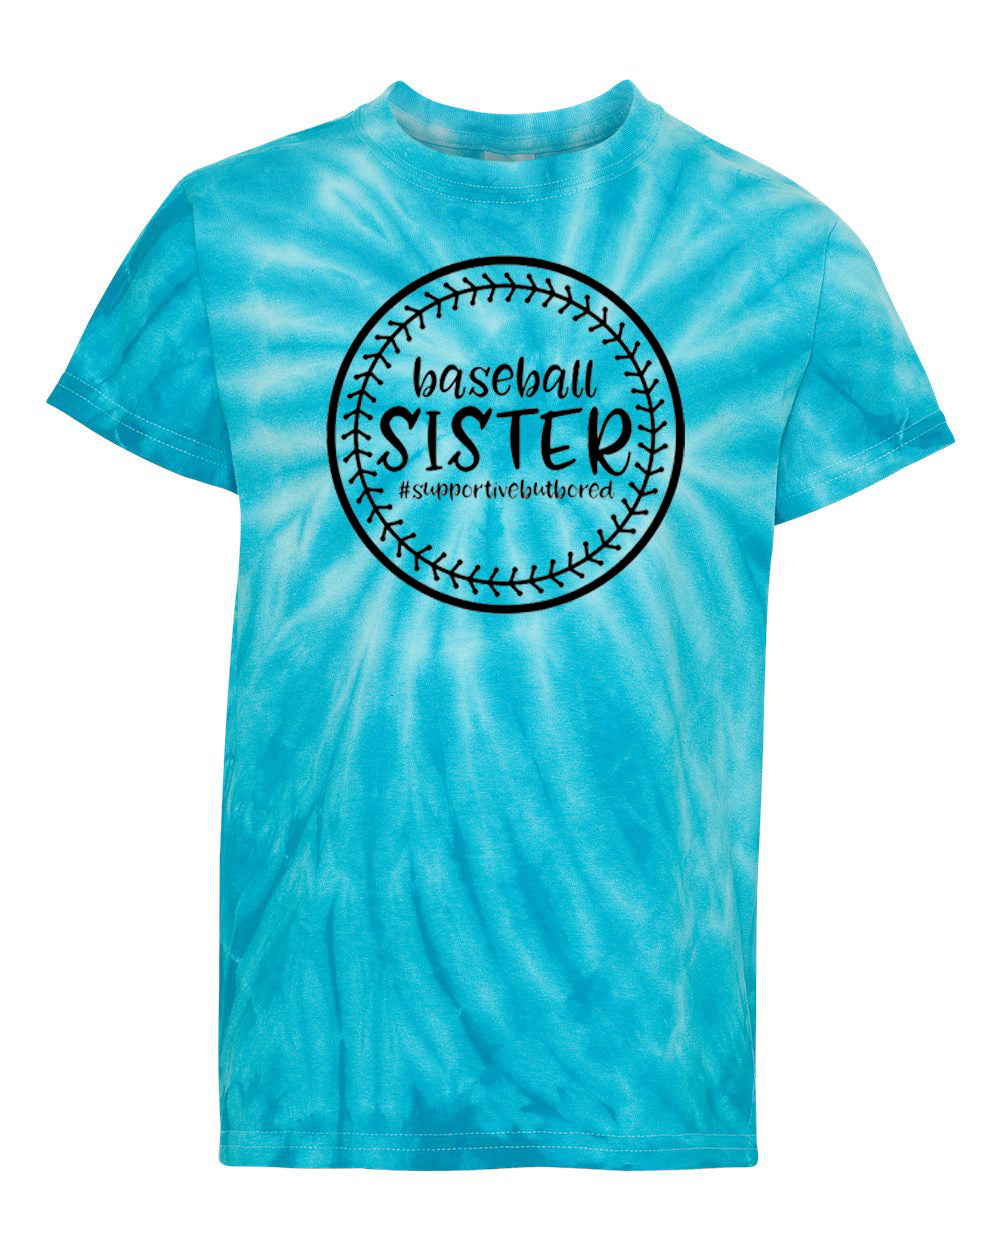 Baseball Sister Youth Tie Dye T-Shirt Turquoise